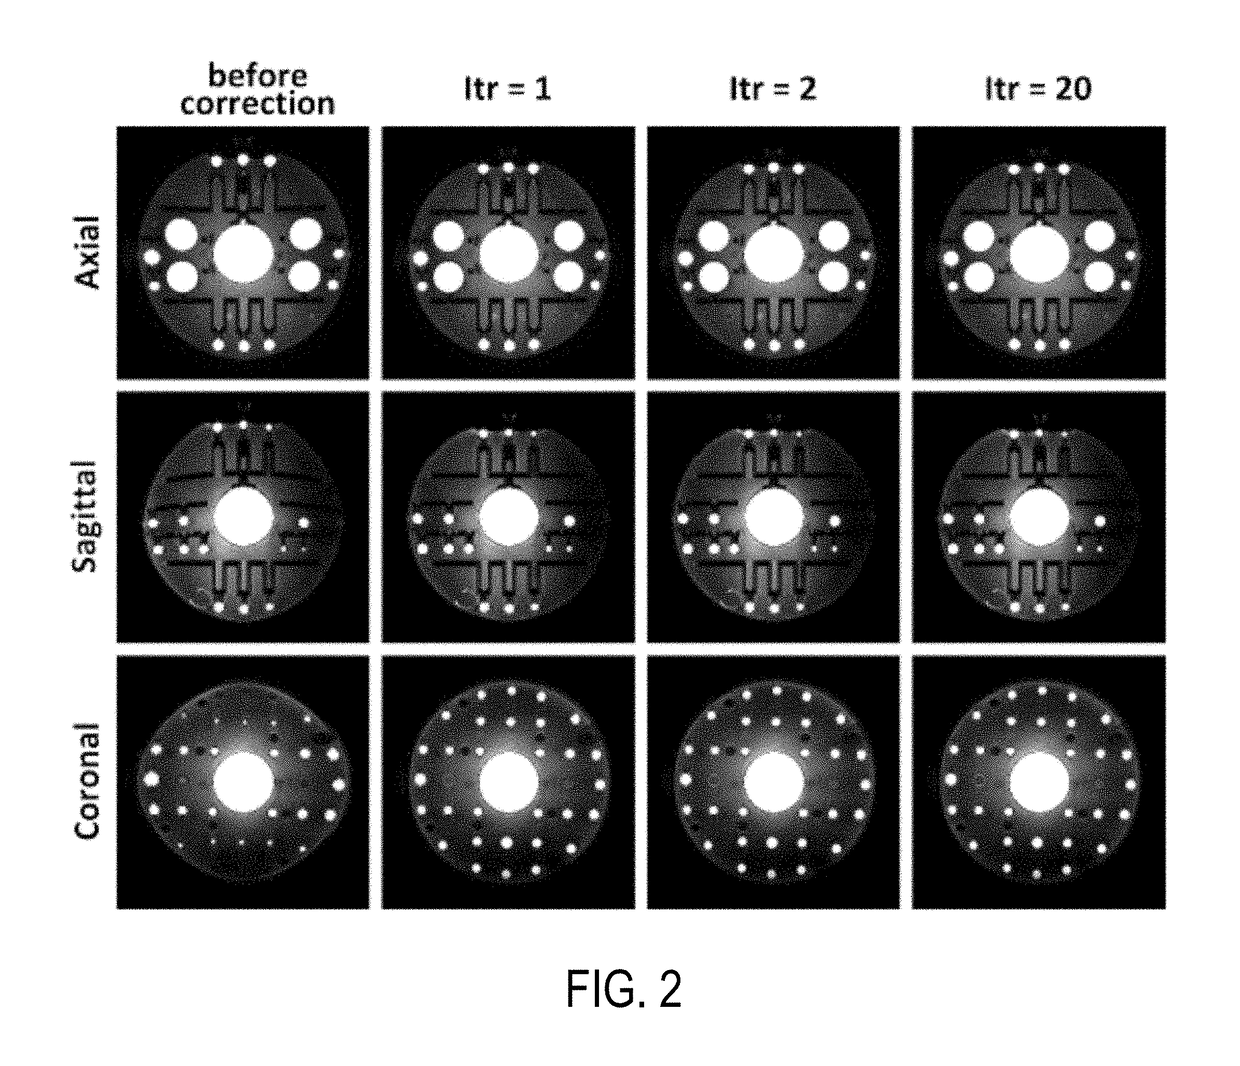 Integrated image reconstruction and gradient non-linearity correction with spatial support constraints for magnetic resonance imaging